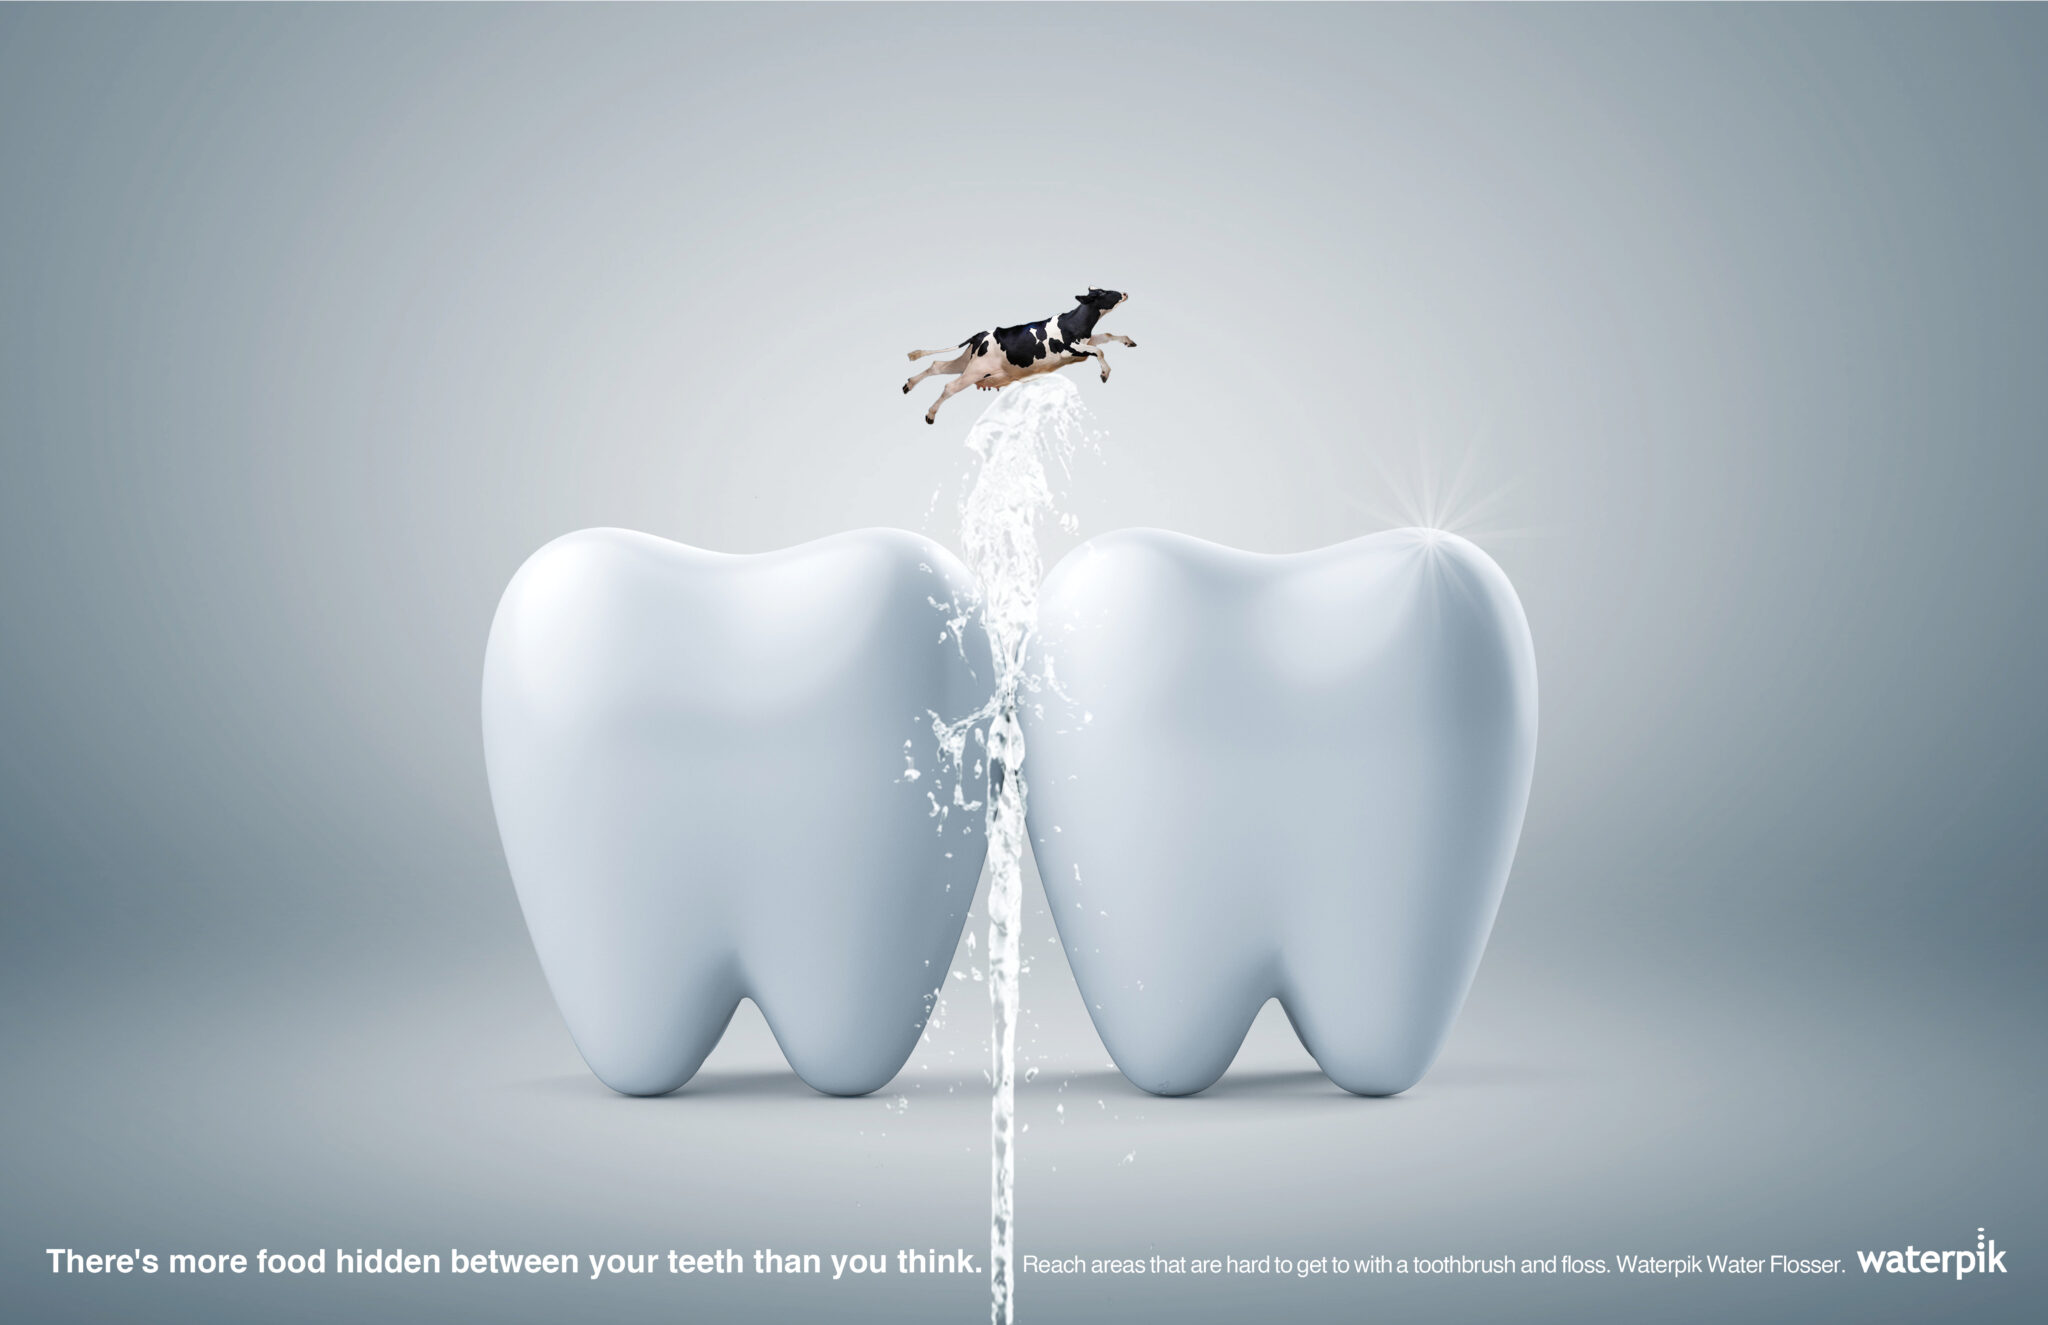 Victoria Lin’s Platinum-winning campaign “Flushed Away” for Waterpik Water Flosser displays animals getting blasted out of a giant tooth